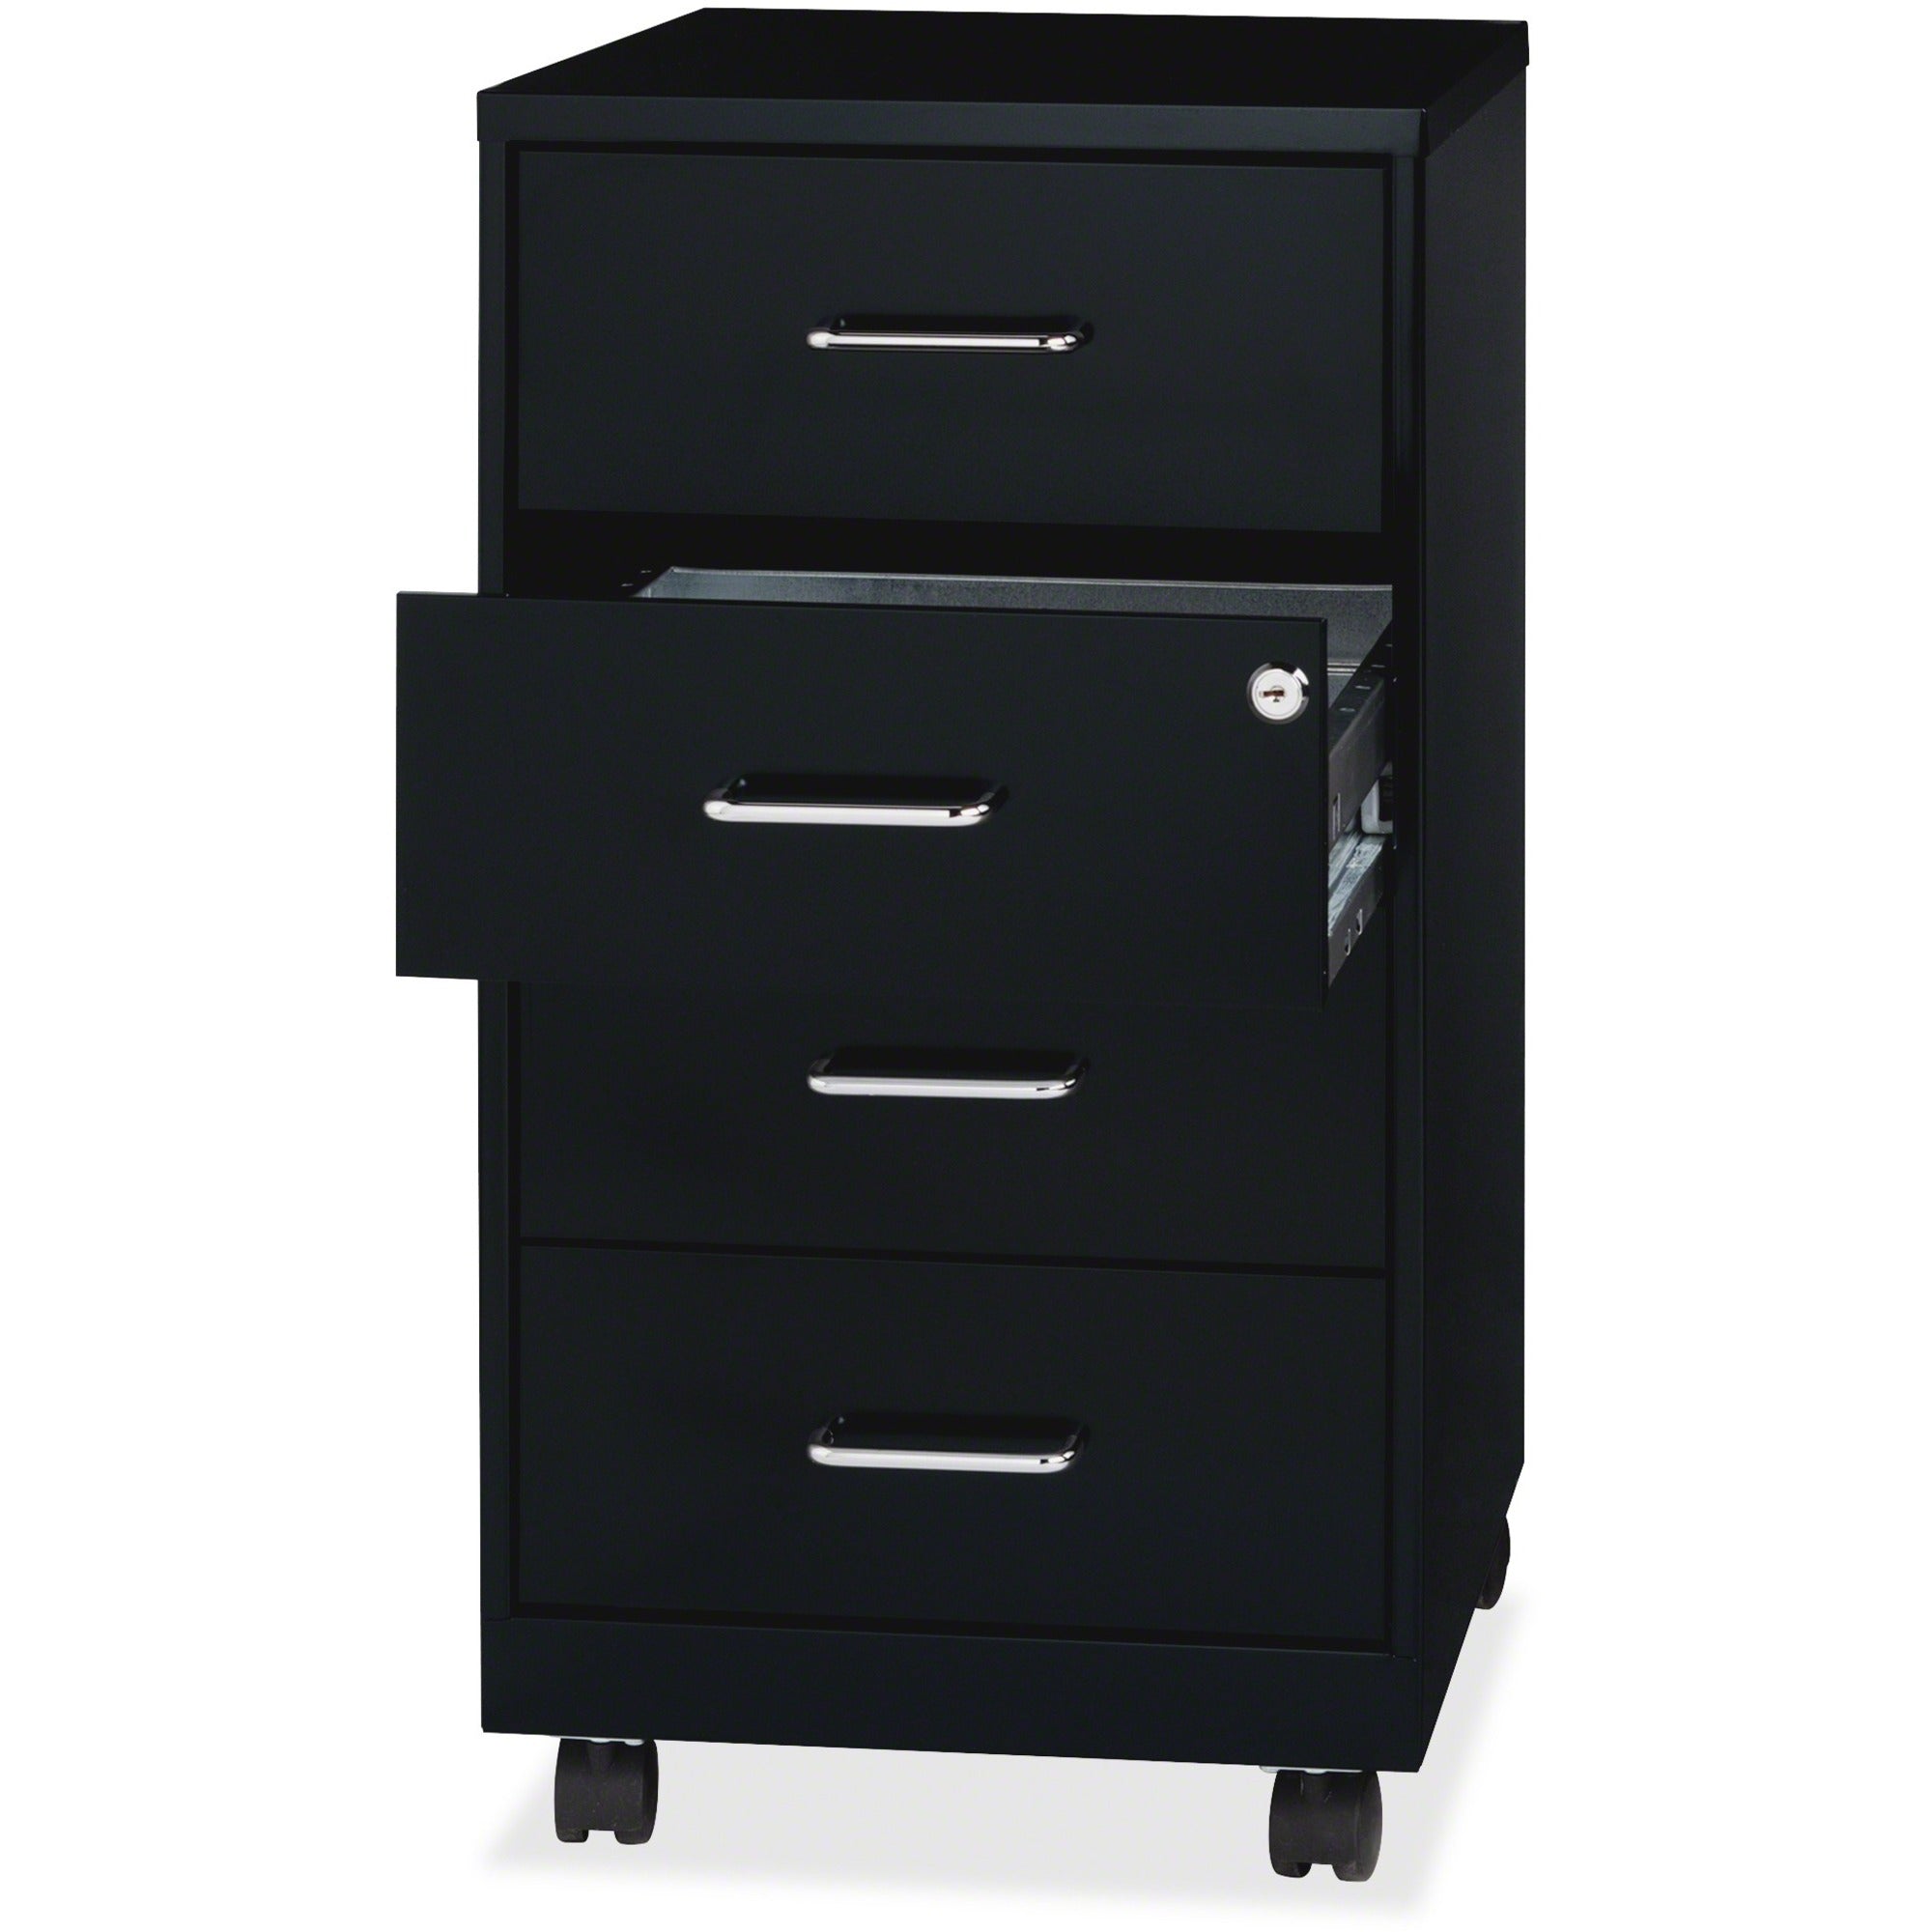 nusparc-mobile-storage-cabinet-142-x-18-x-265-4-x-drawers-letter-legal-mobility-glide-suspension-anti-tip-nonporous-surface-cam-lock-3-4-drawer-extension-black-painted-steel-recycled-assembly-required_nprvf418dmbk - 1